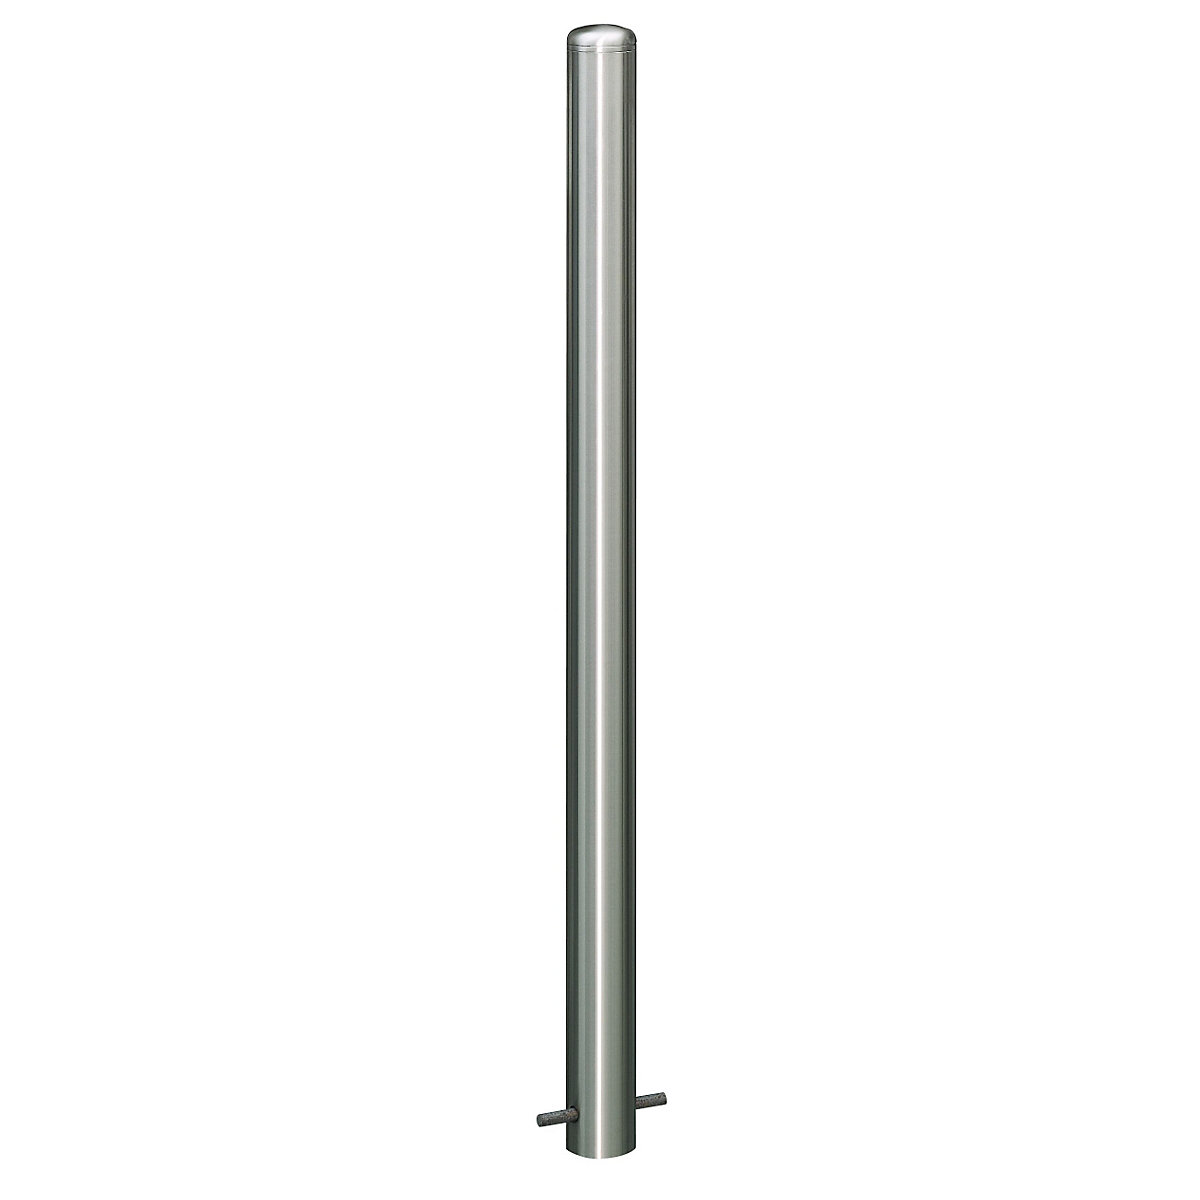 Stainless steel barrier post, with end cap, base plate to bolt in place, Ø 102 mm